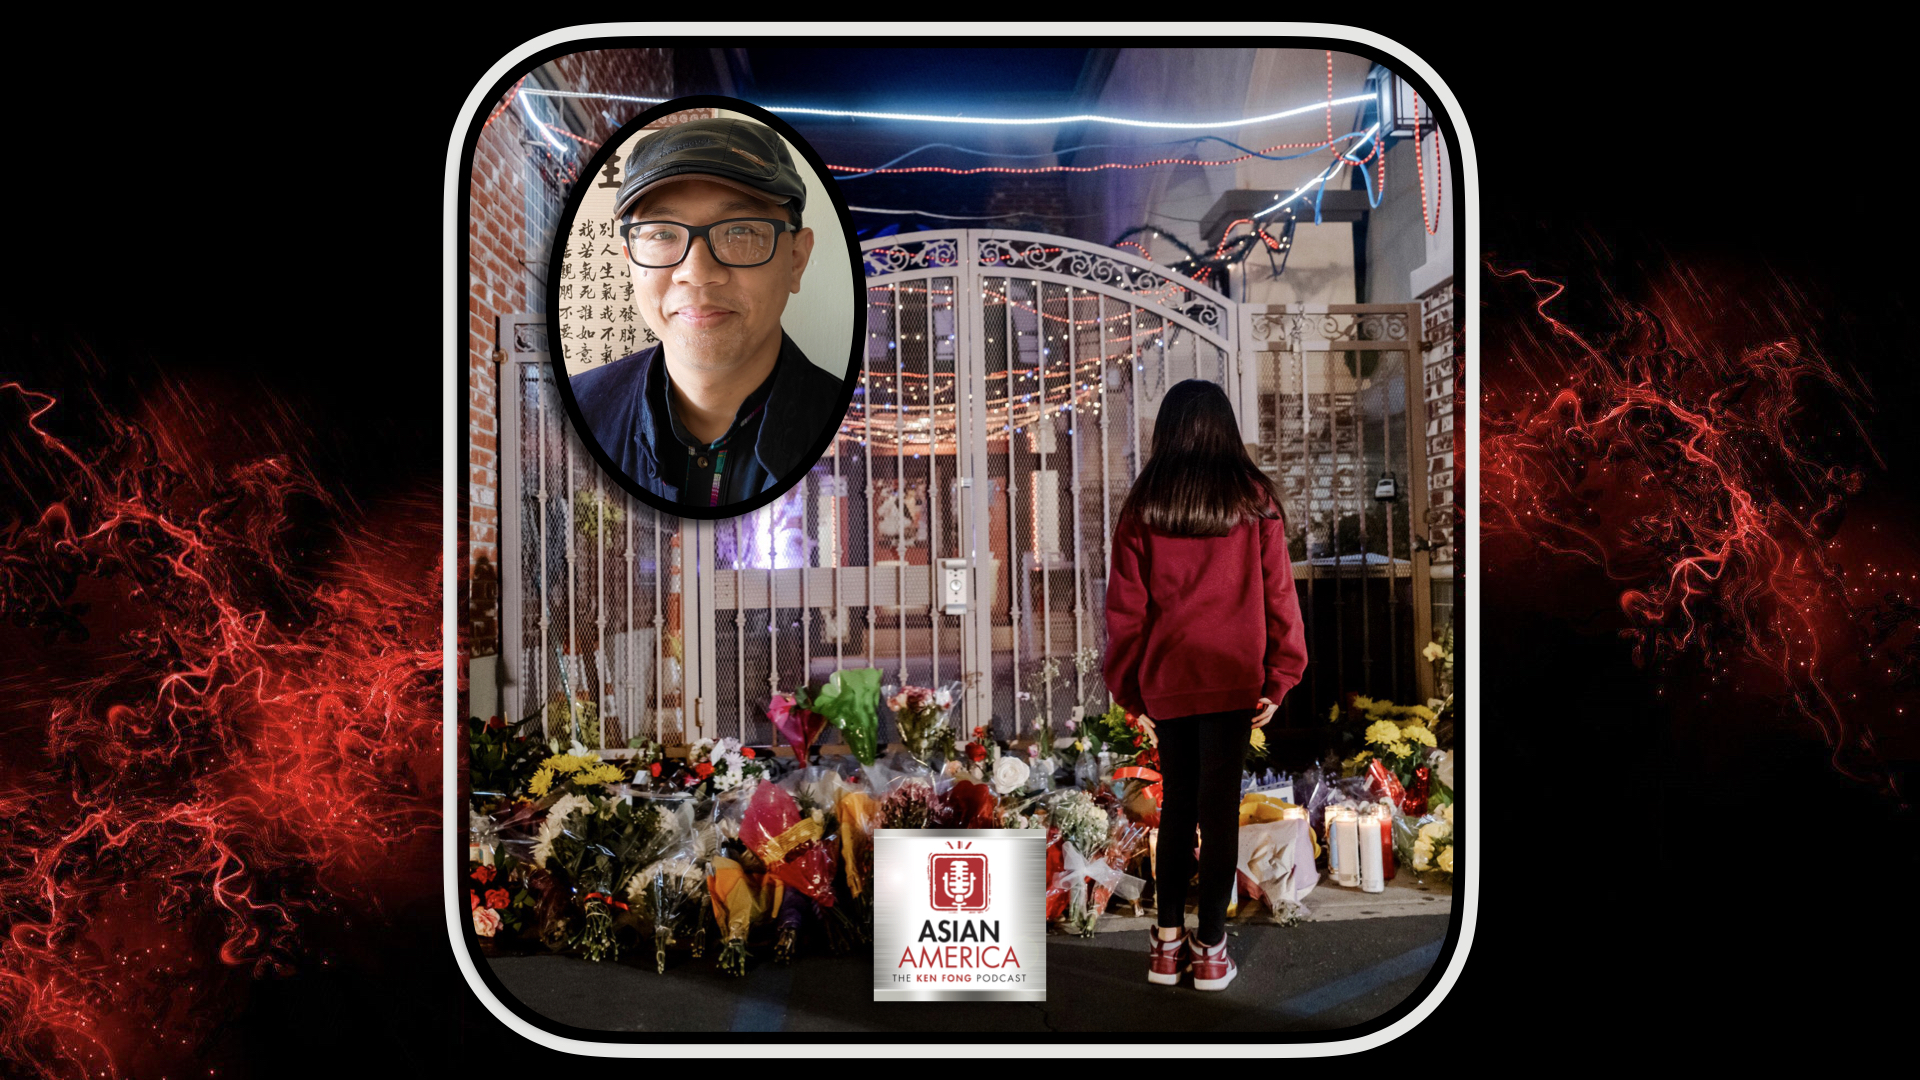 Ep 410: Eric Chen On Caring Now For The Victims Of The Monterey Park Shooting